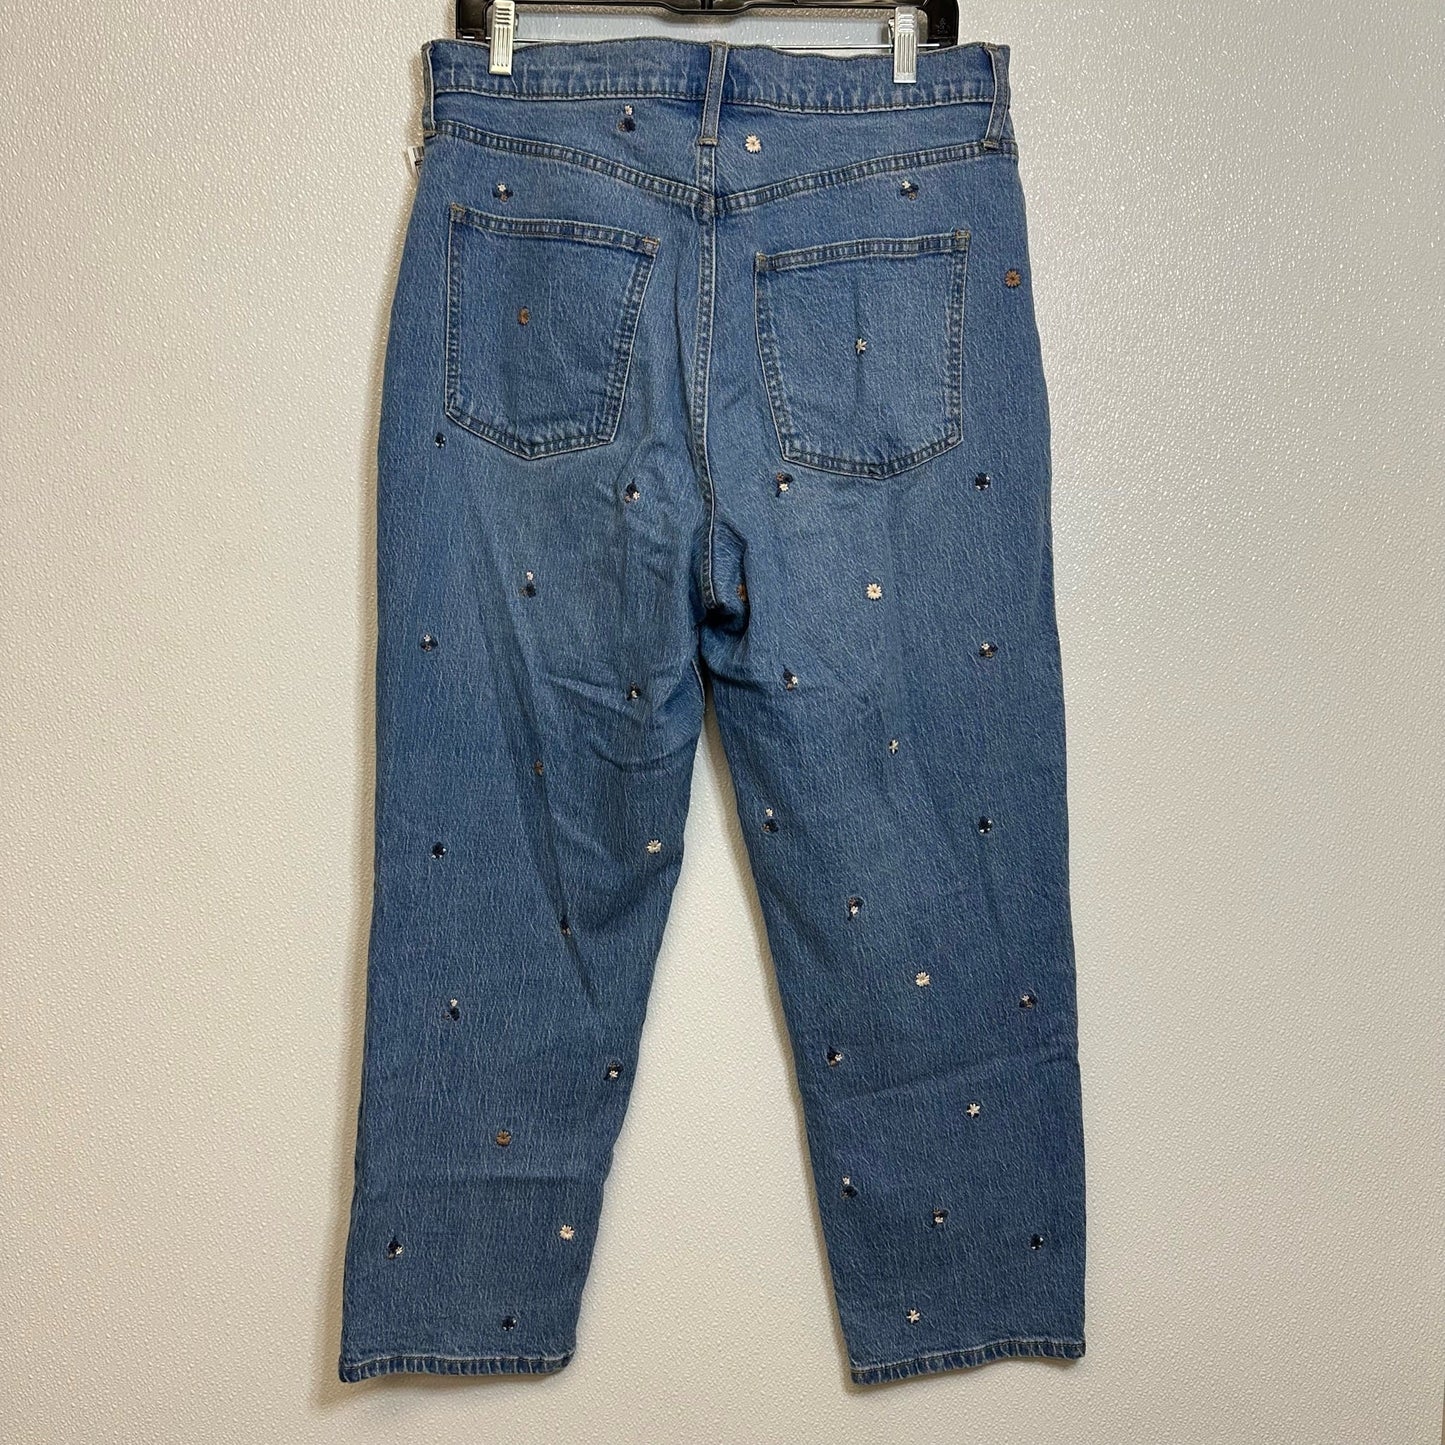 Jeans Relaxed/boyfriend By Universal Thread  Size: 12